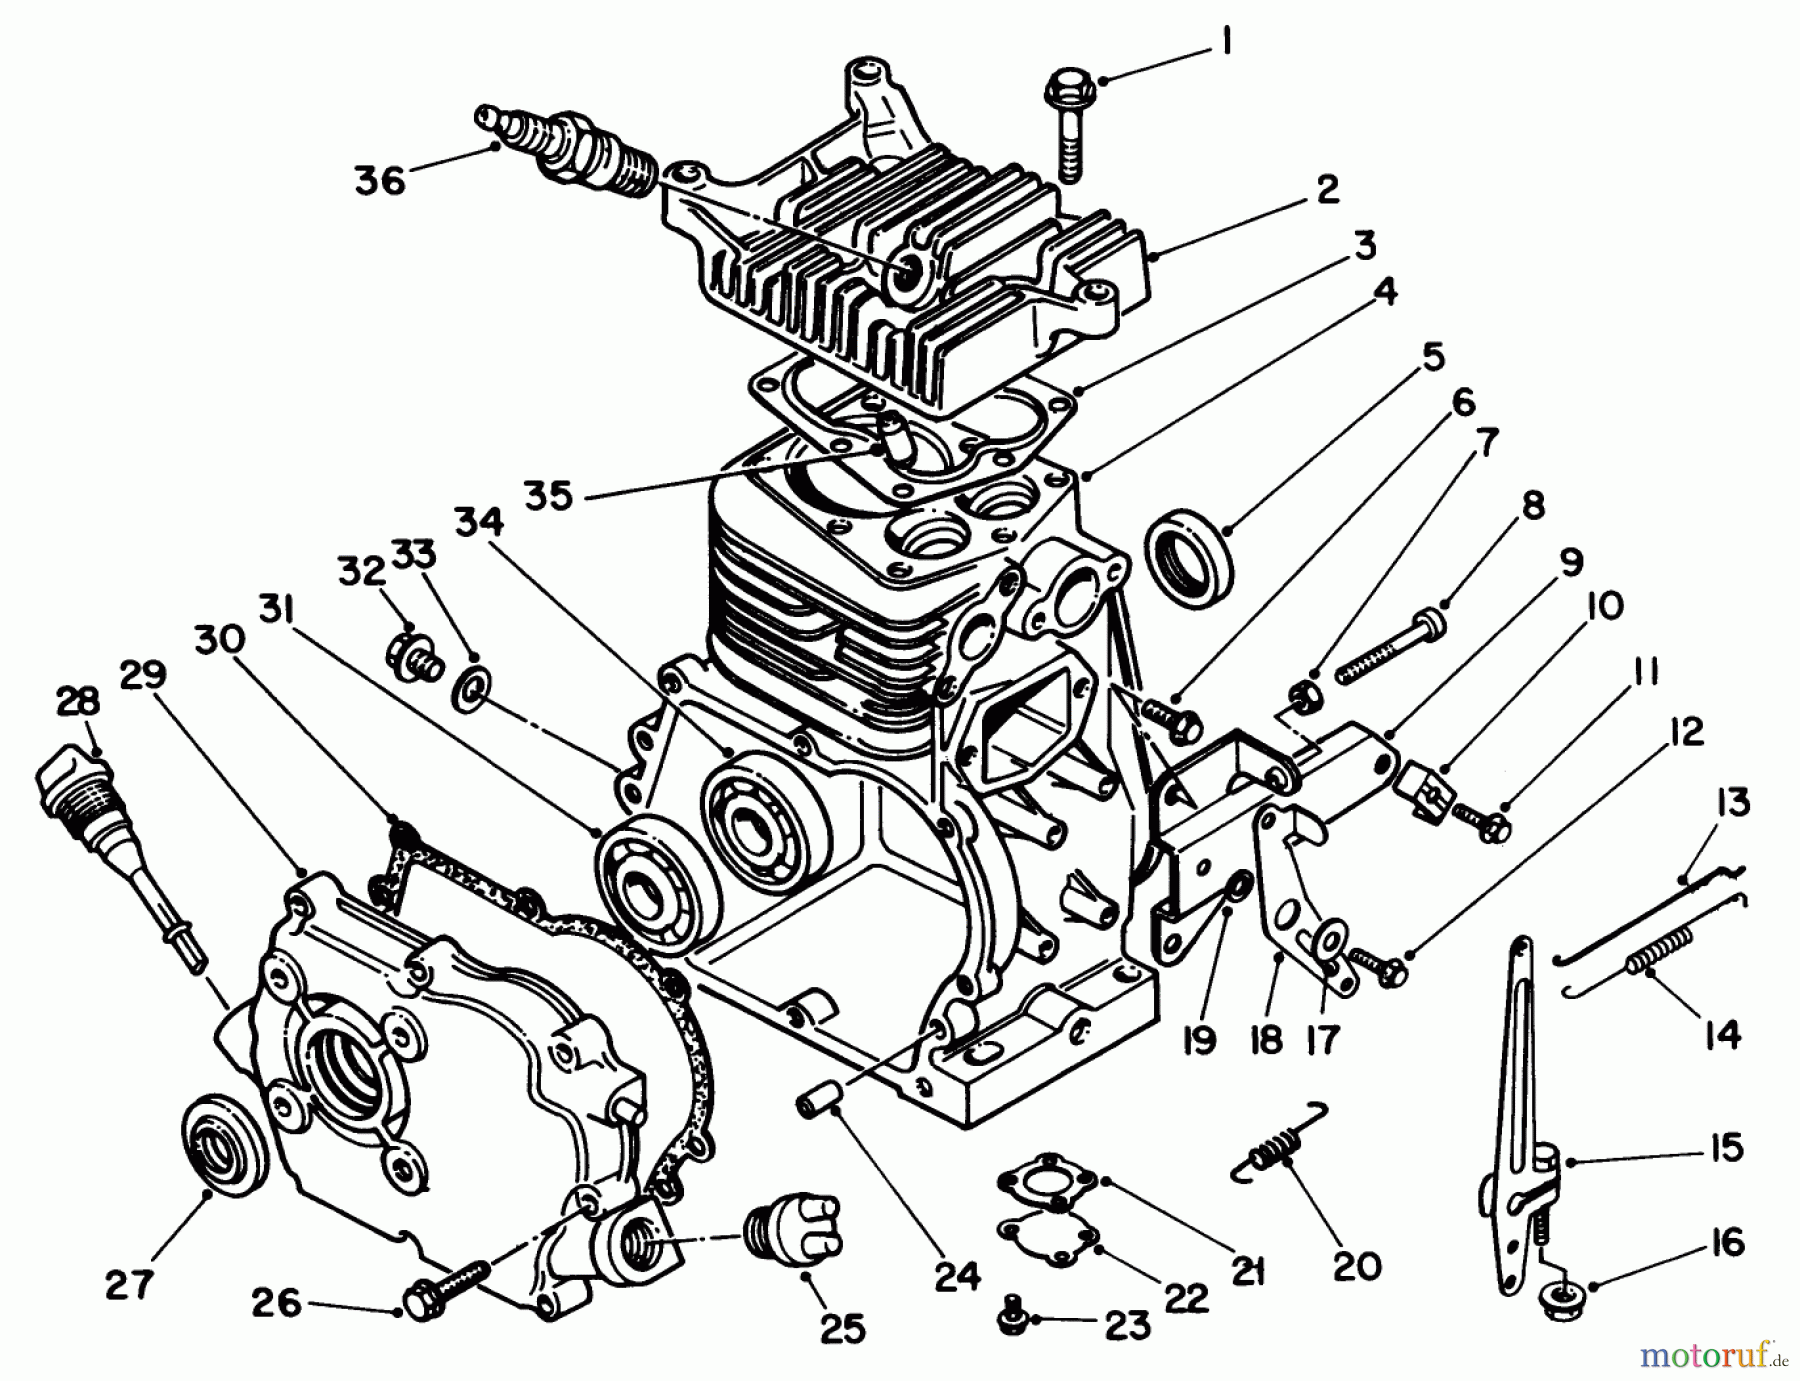  Toro Neu Engines 59270 - Toro Replacement Engine, 4-Cycle, 1984 (4000001-4999999) CRANKCASE ASSEMBLY